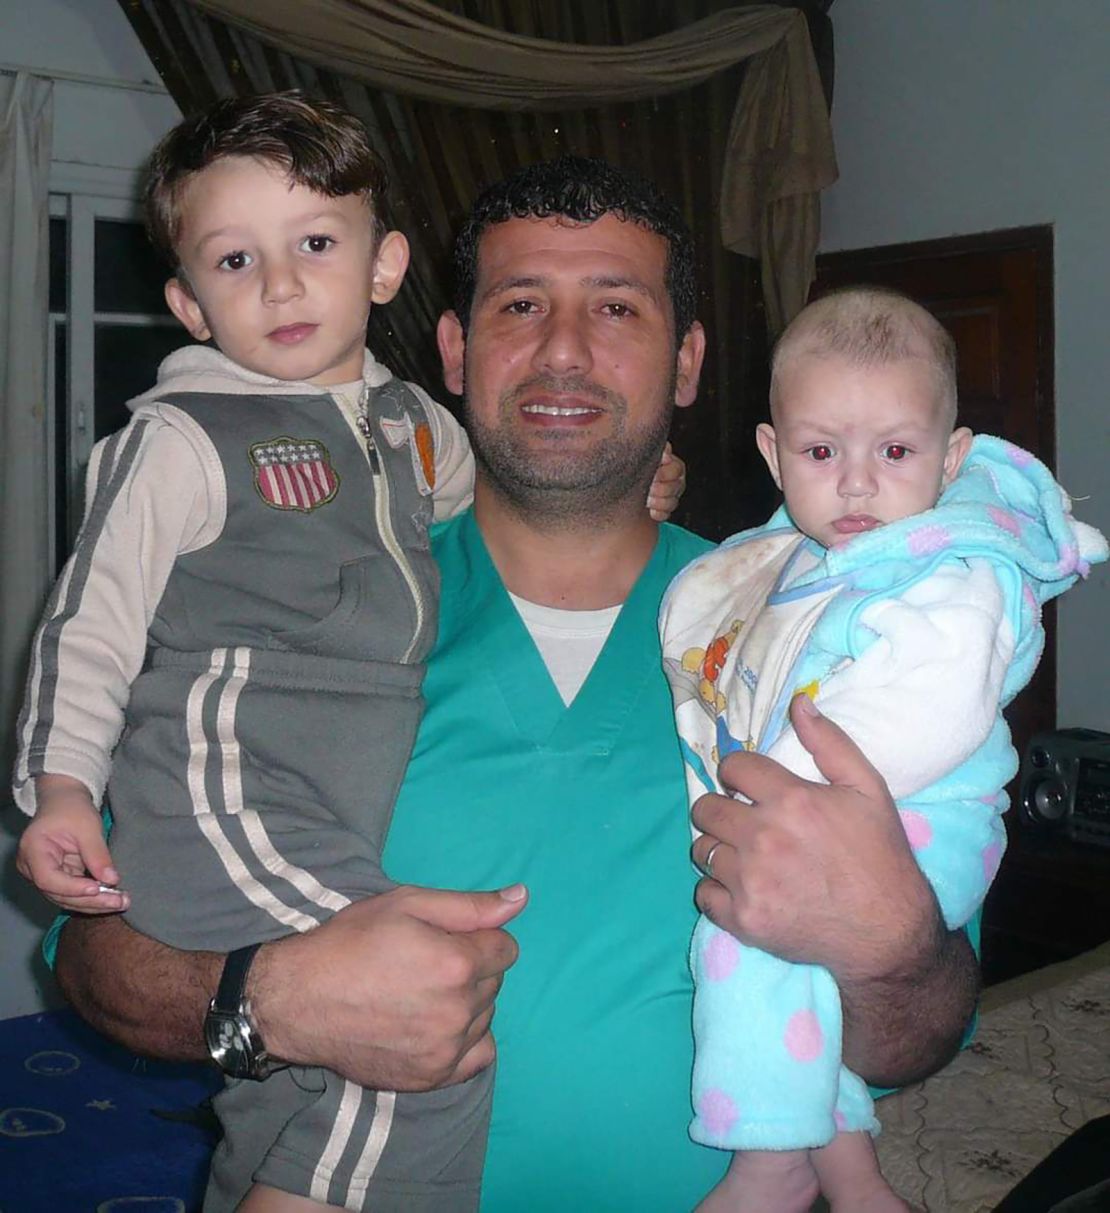 Al-Bursh is pictured with his two children. Colleagues told CNN the doctor "loved life."